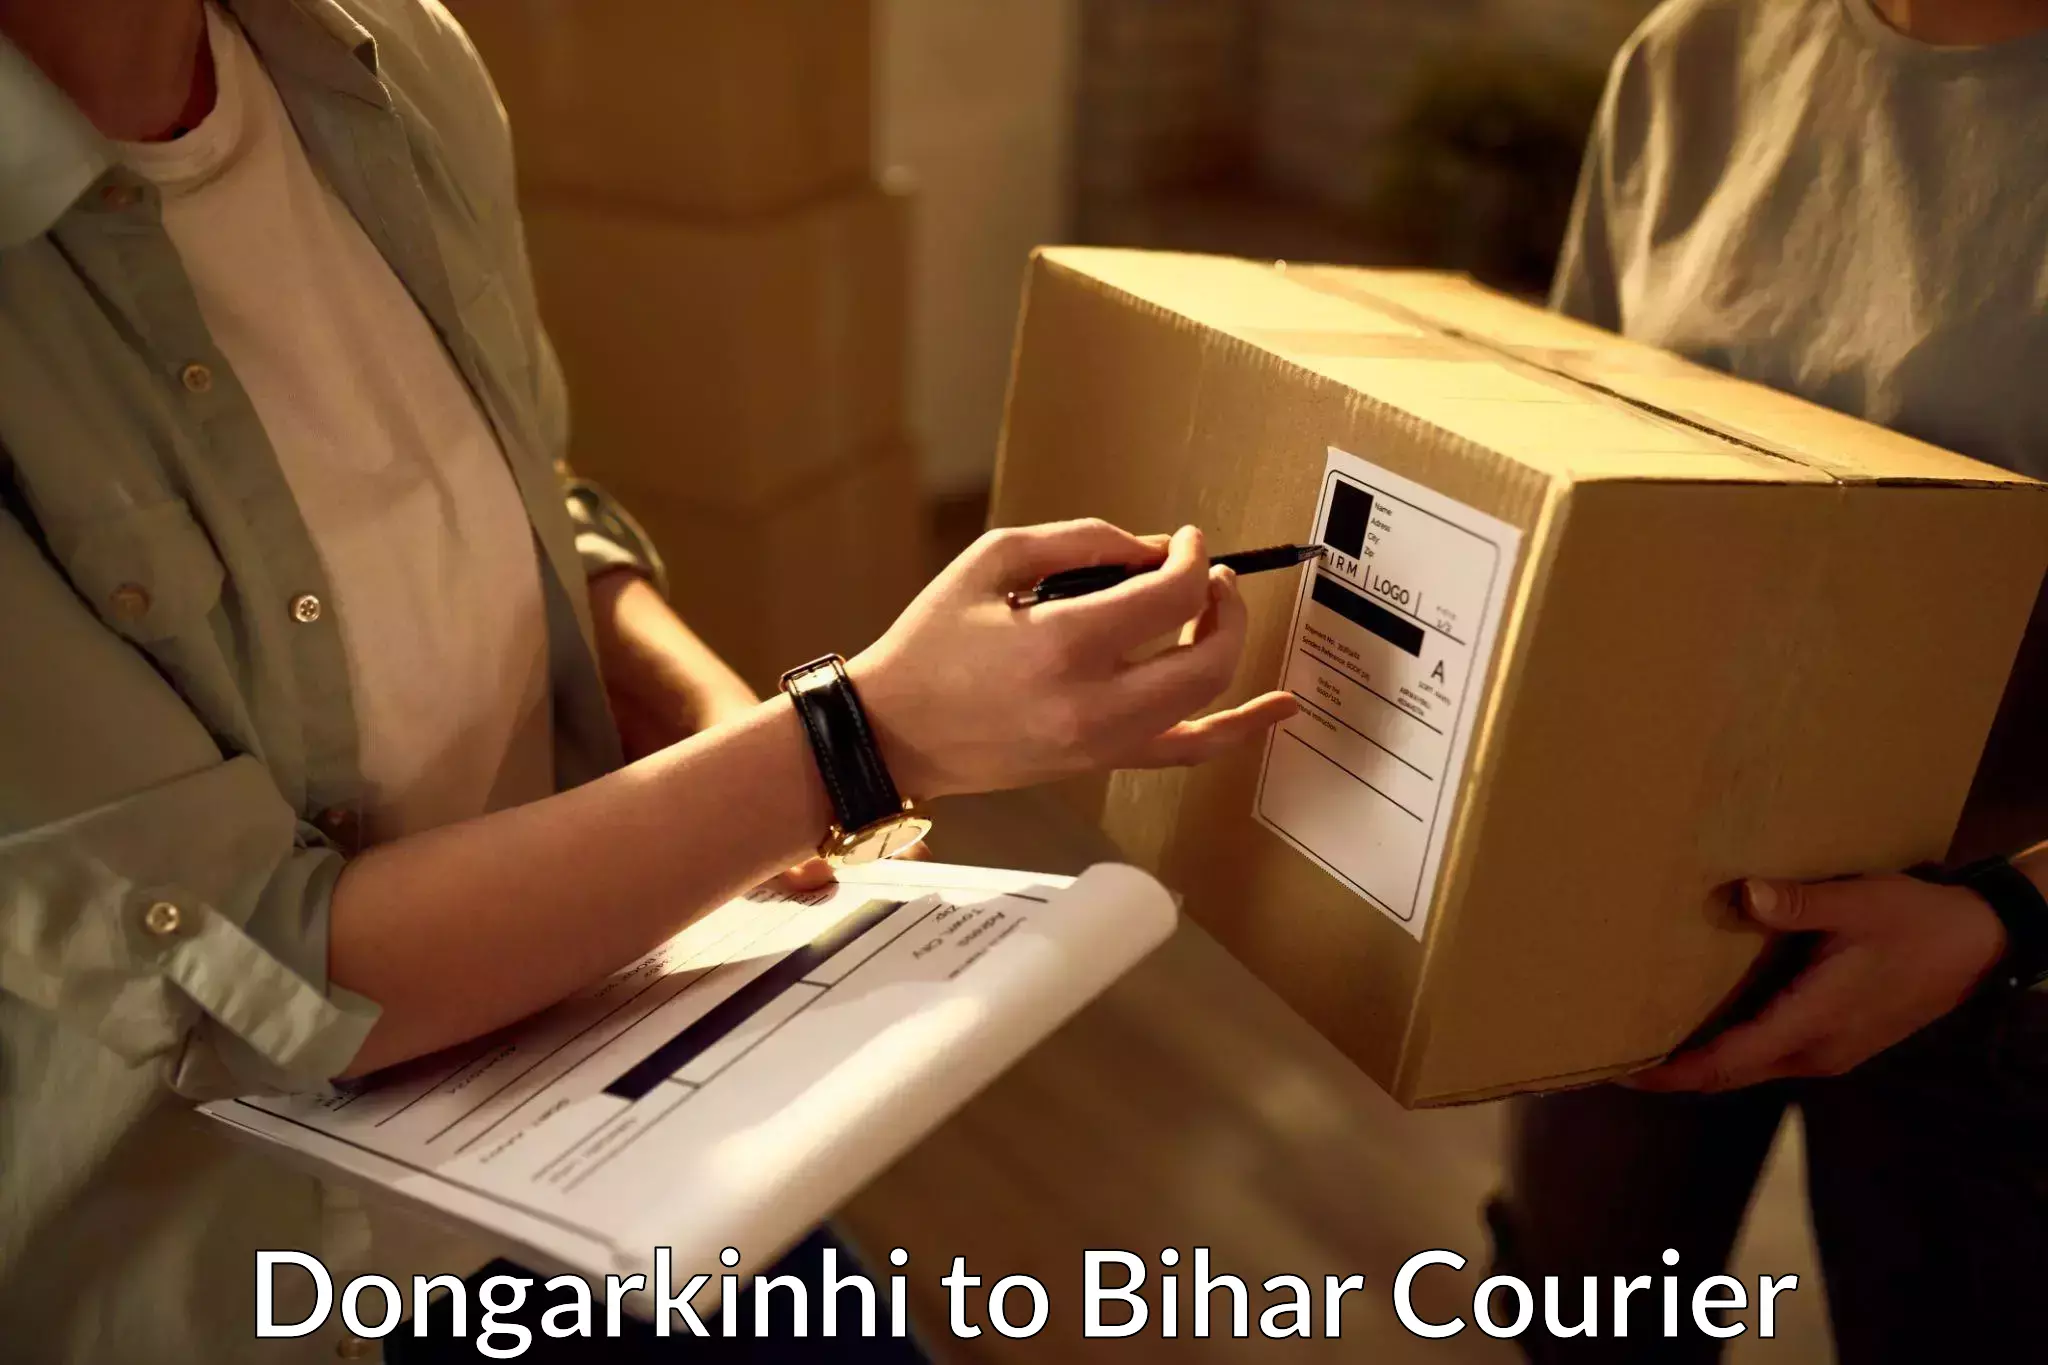 Discount courier rates Dongarkinhi to Piro